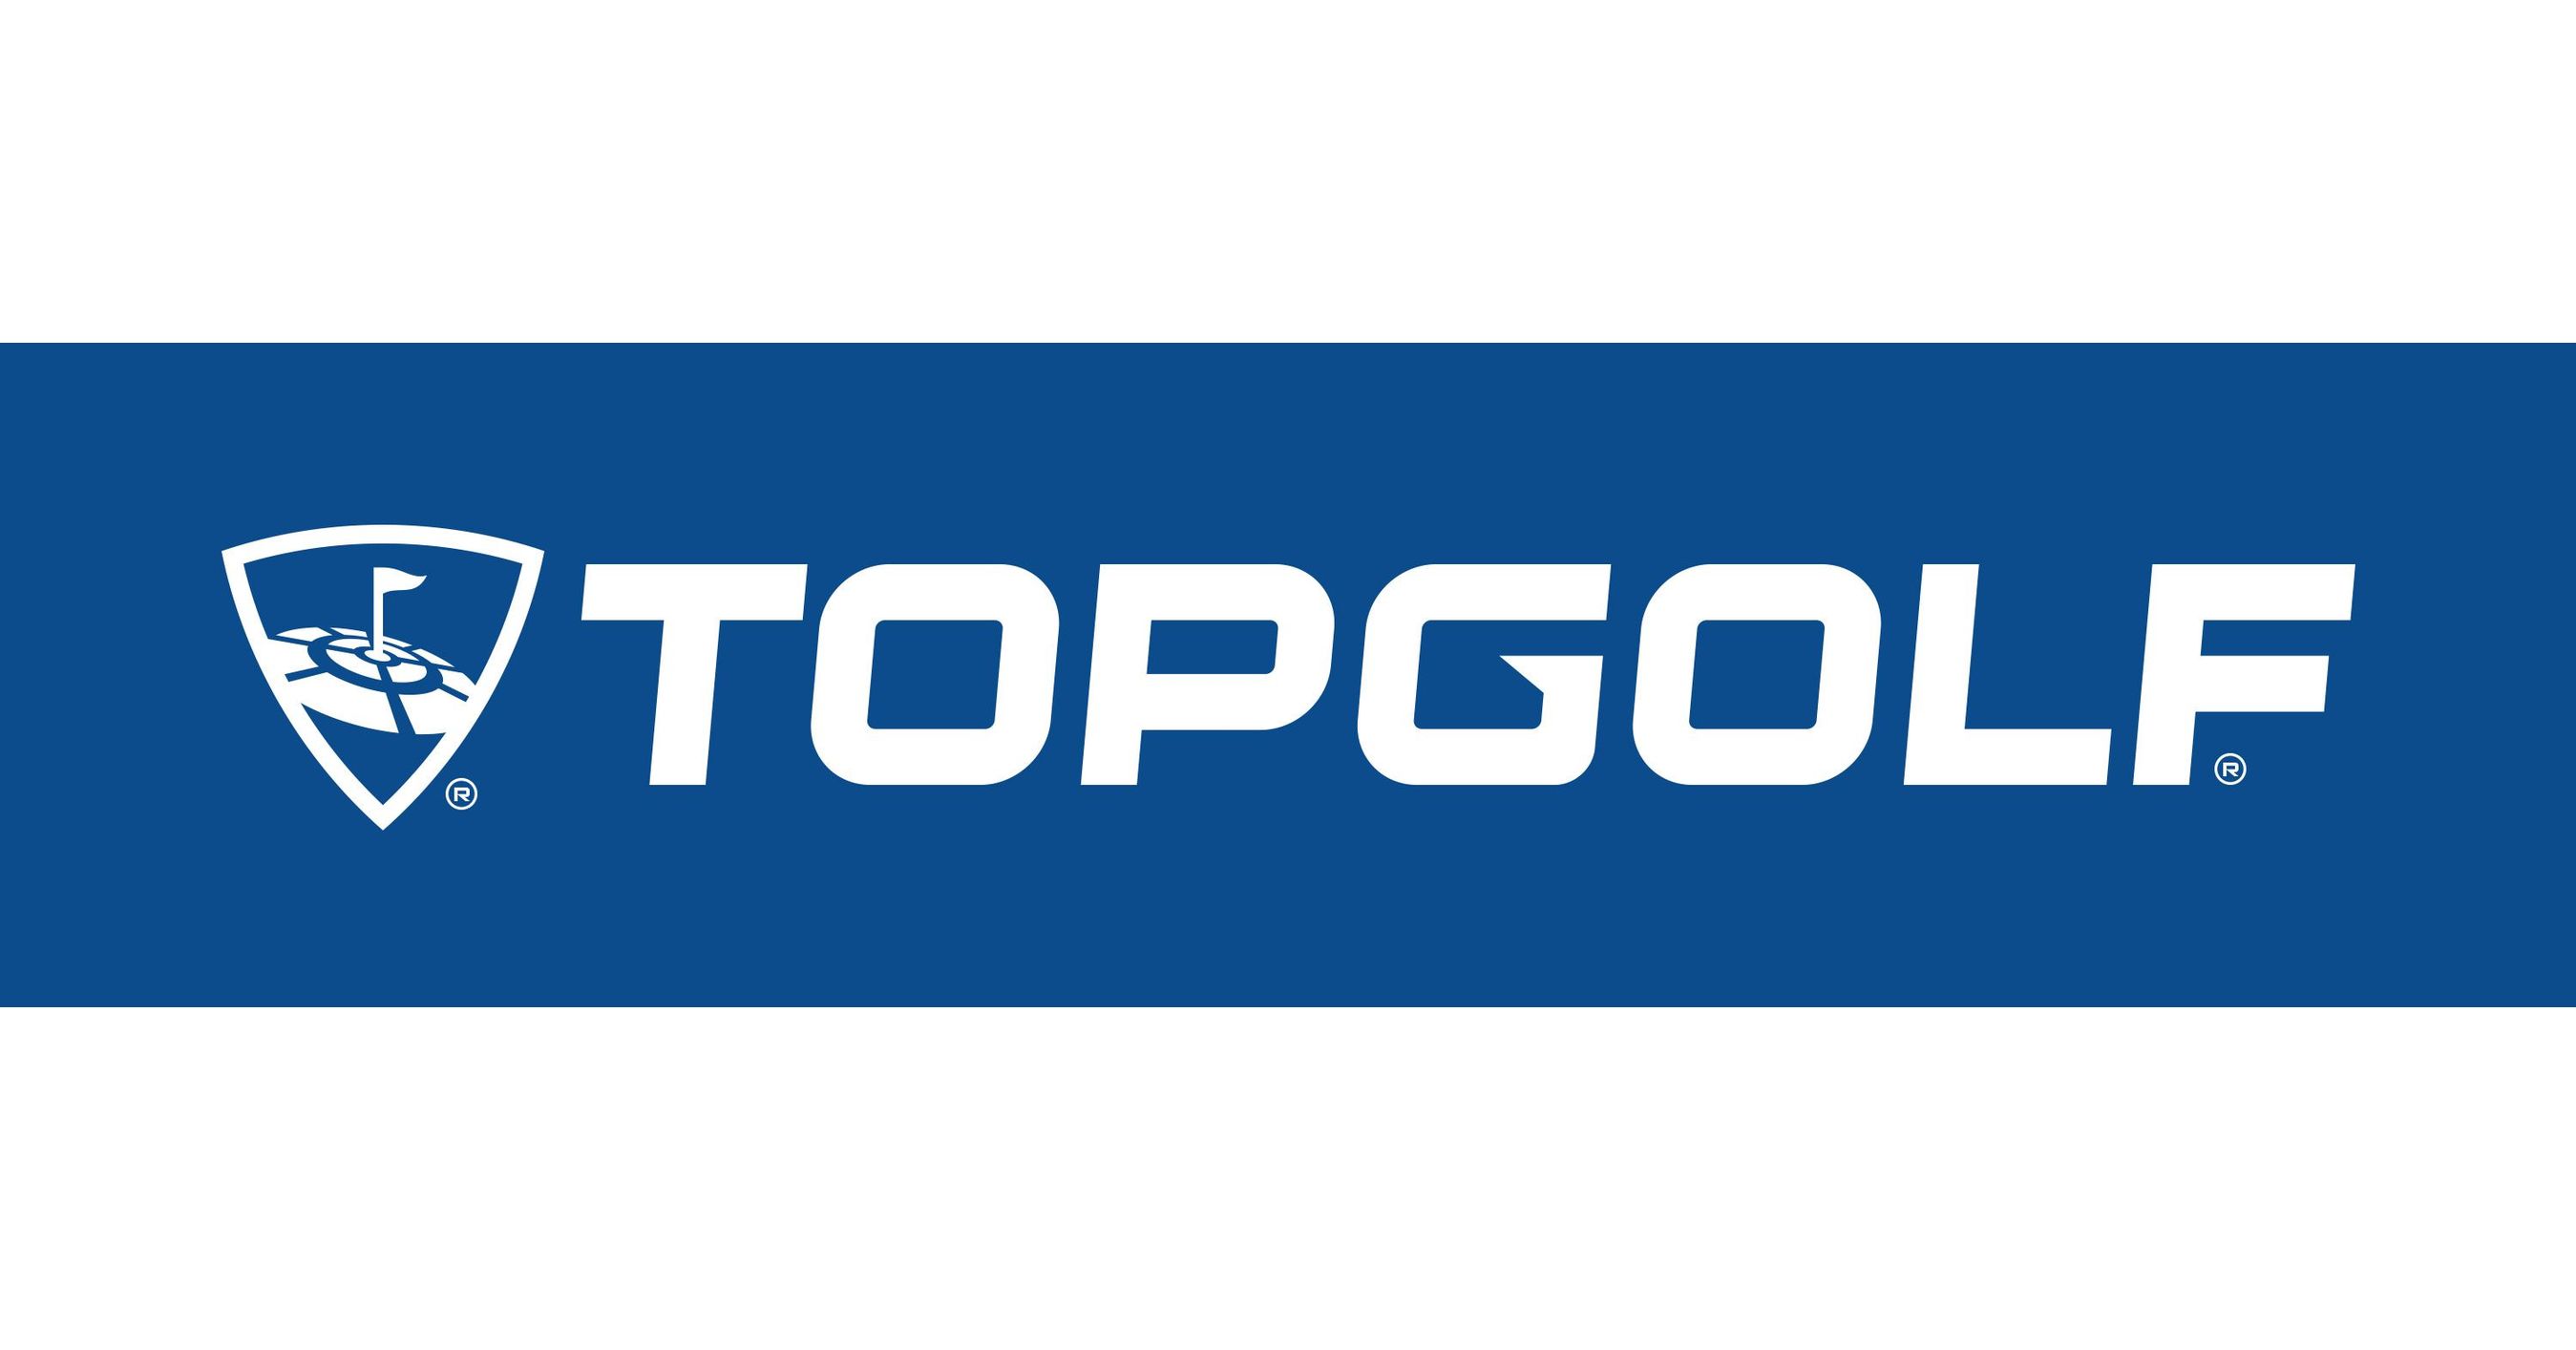 Long-awaited Topgolf facility is now open in St. Petersburg